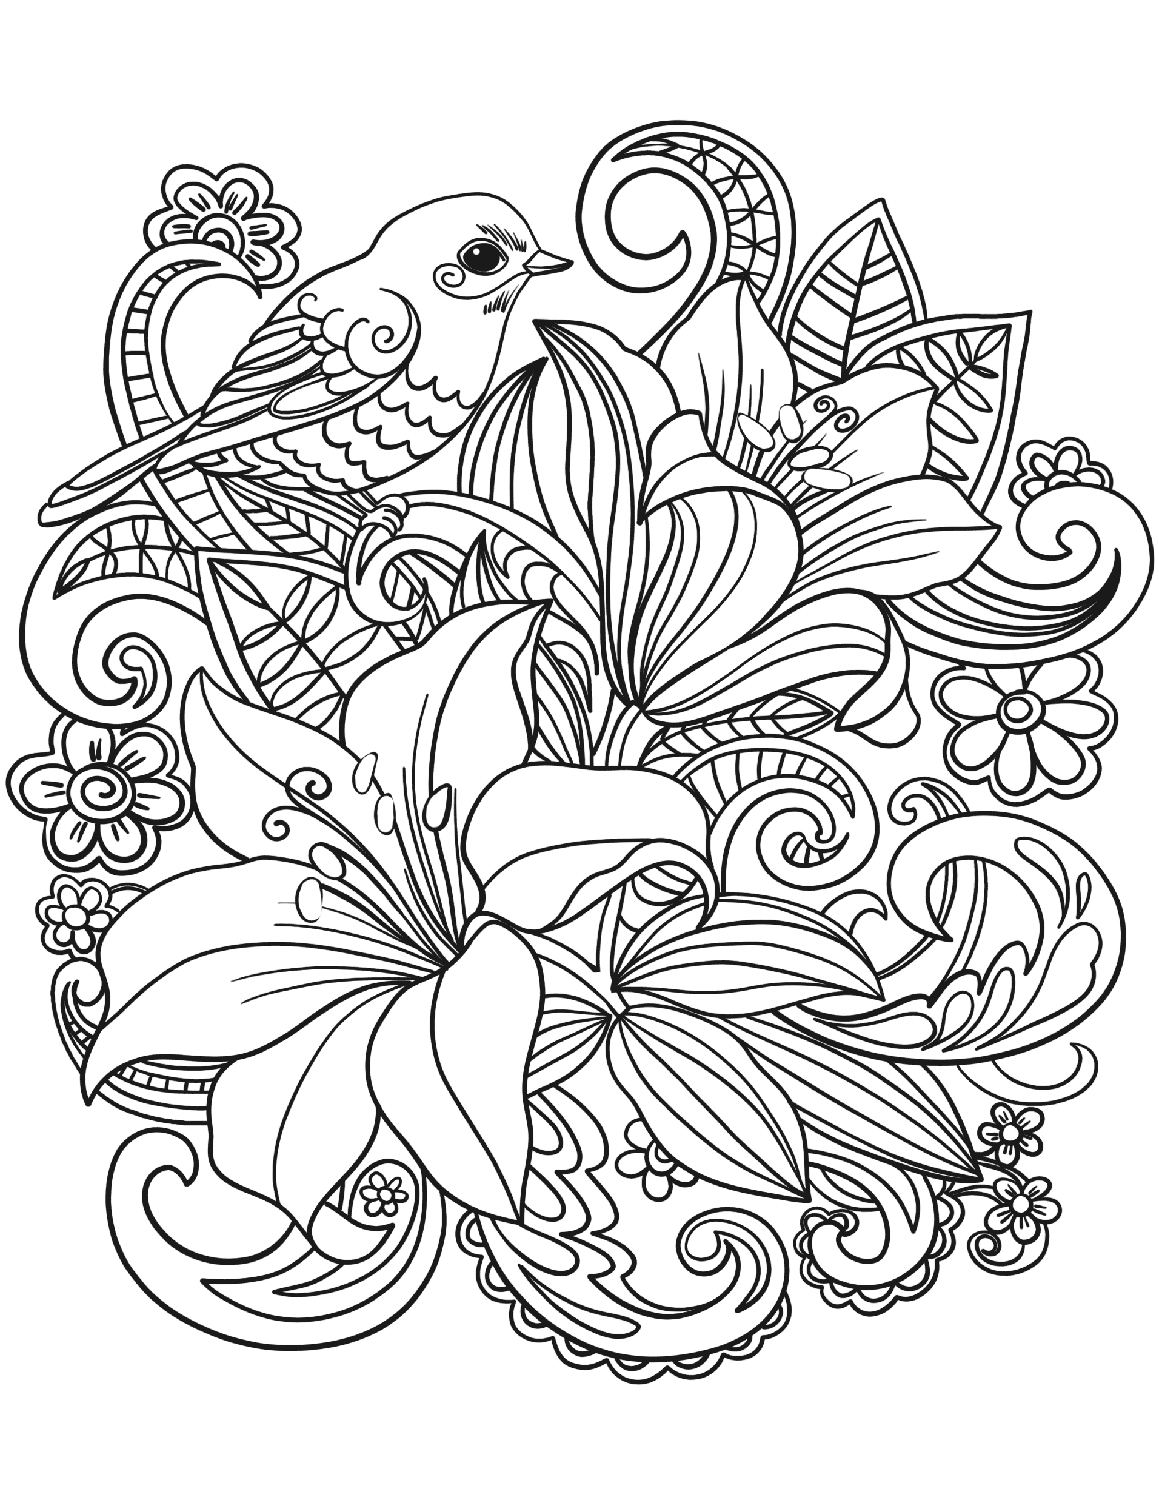 easy adult coloring pages